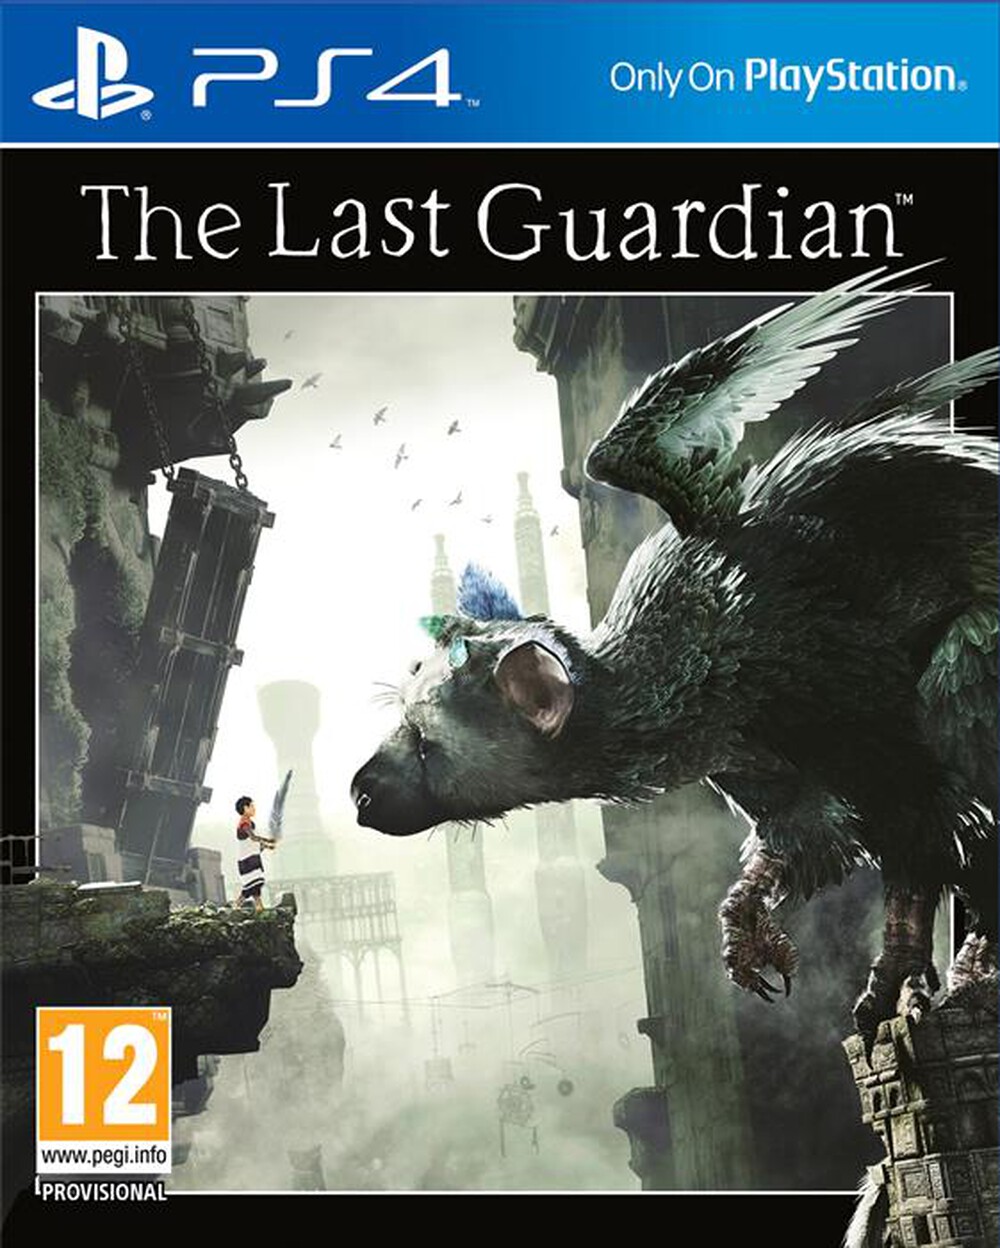 "SONY COMPUTER - The Last Guardian PS4"